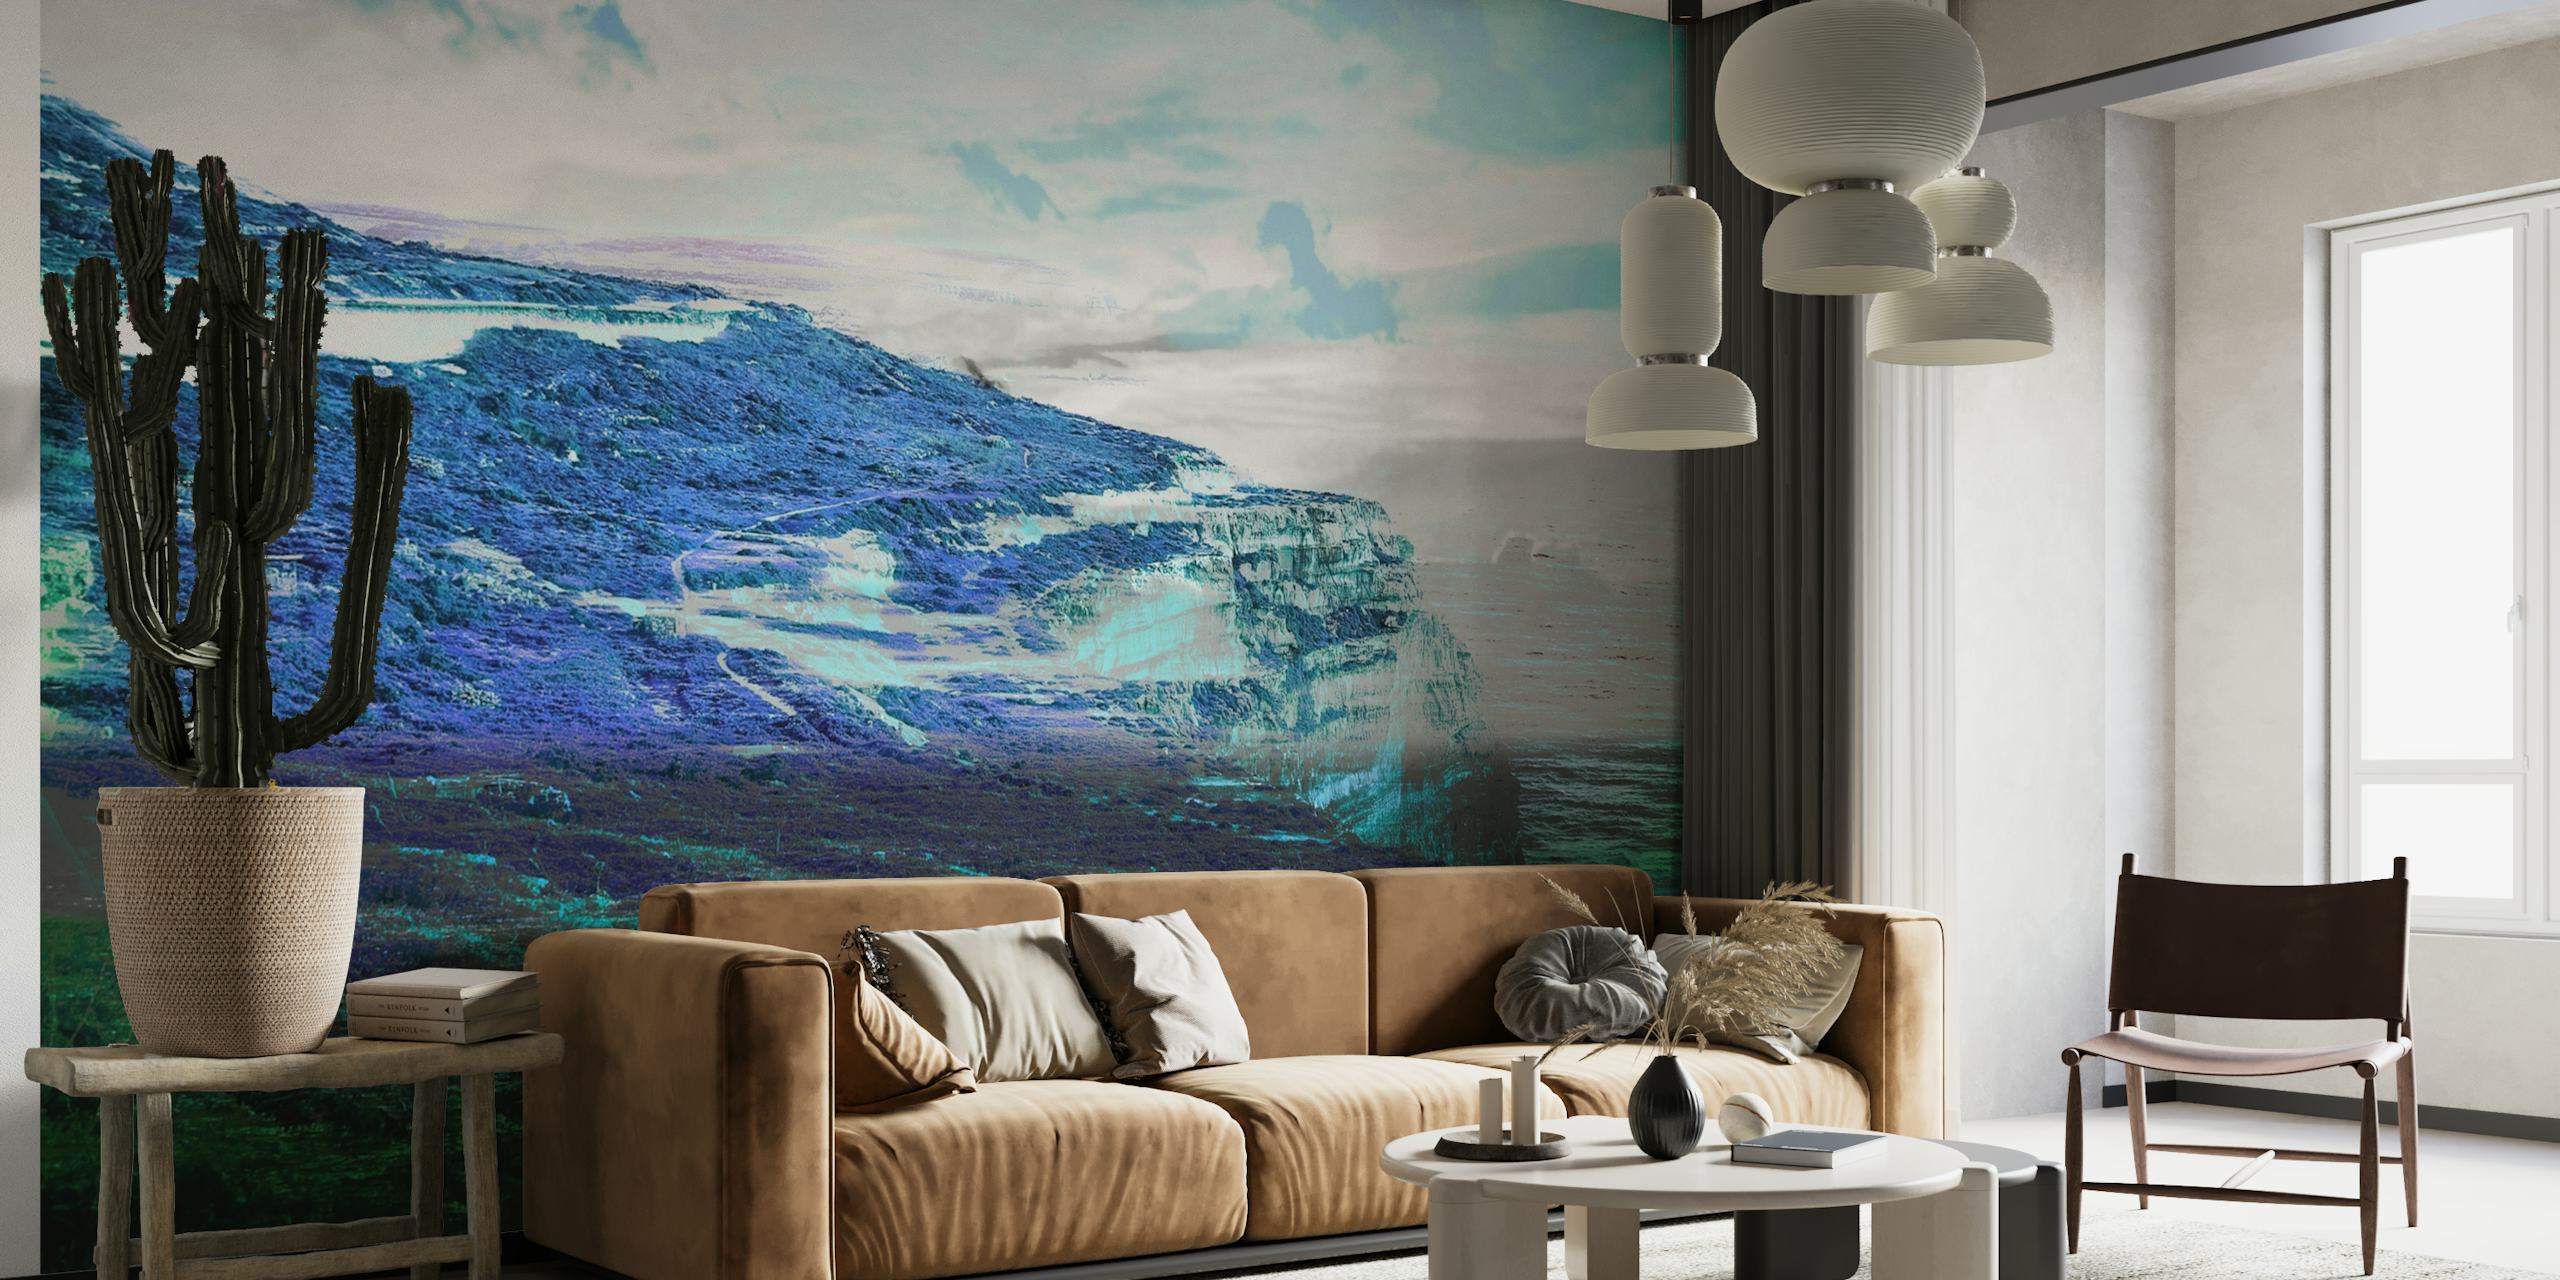 Nordic mountain landscape wall mural with misty blue and green hues